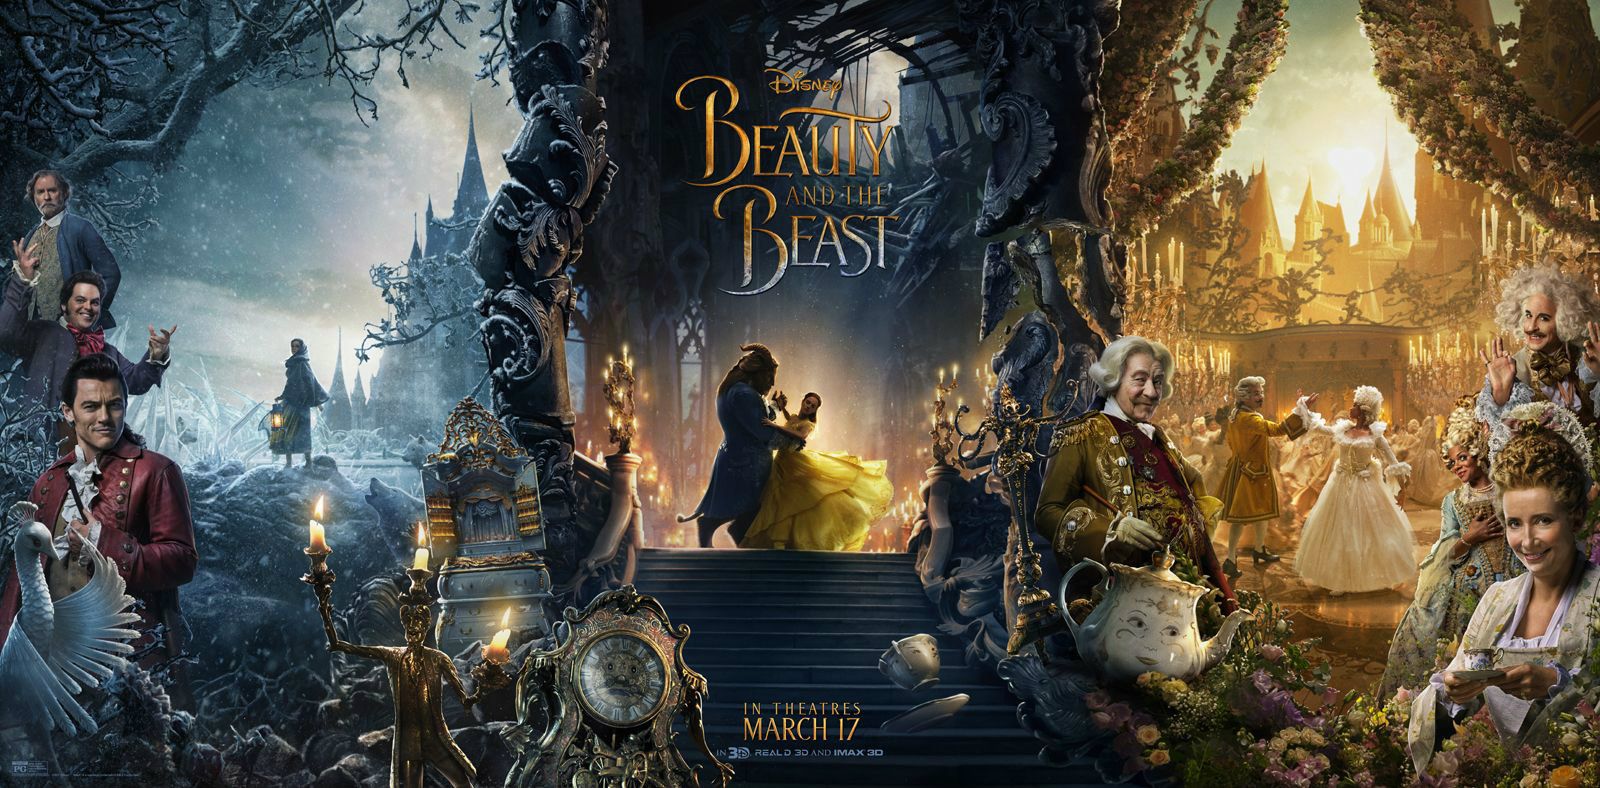 Beauty and the Beast - Triptych poster